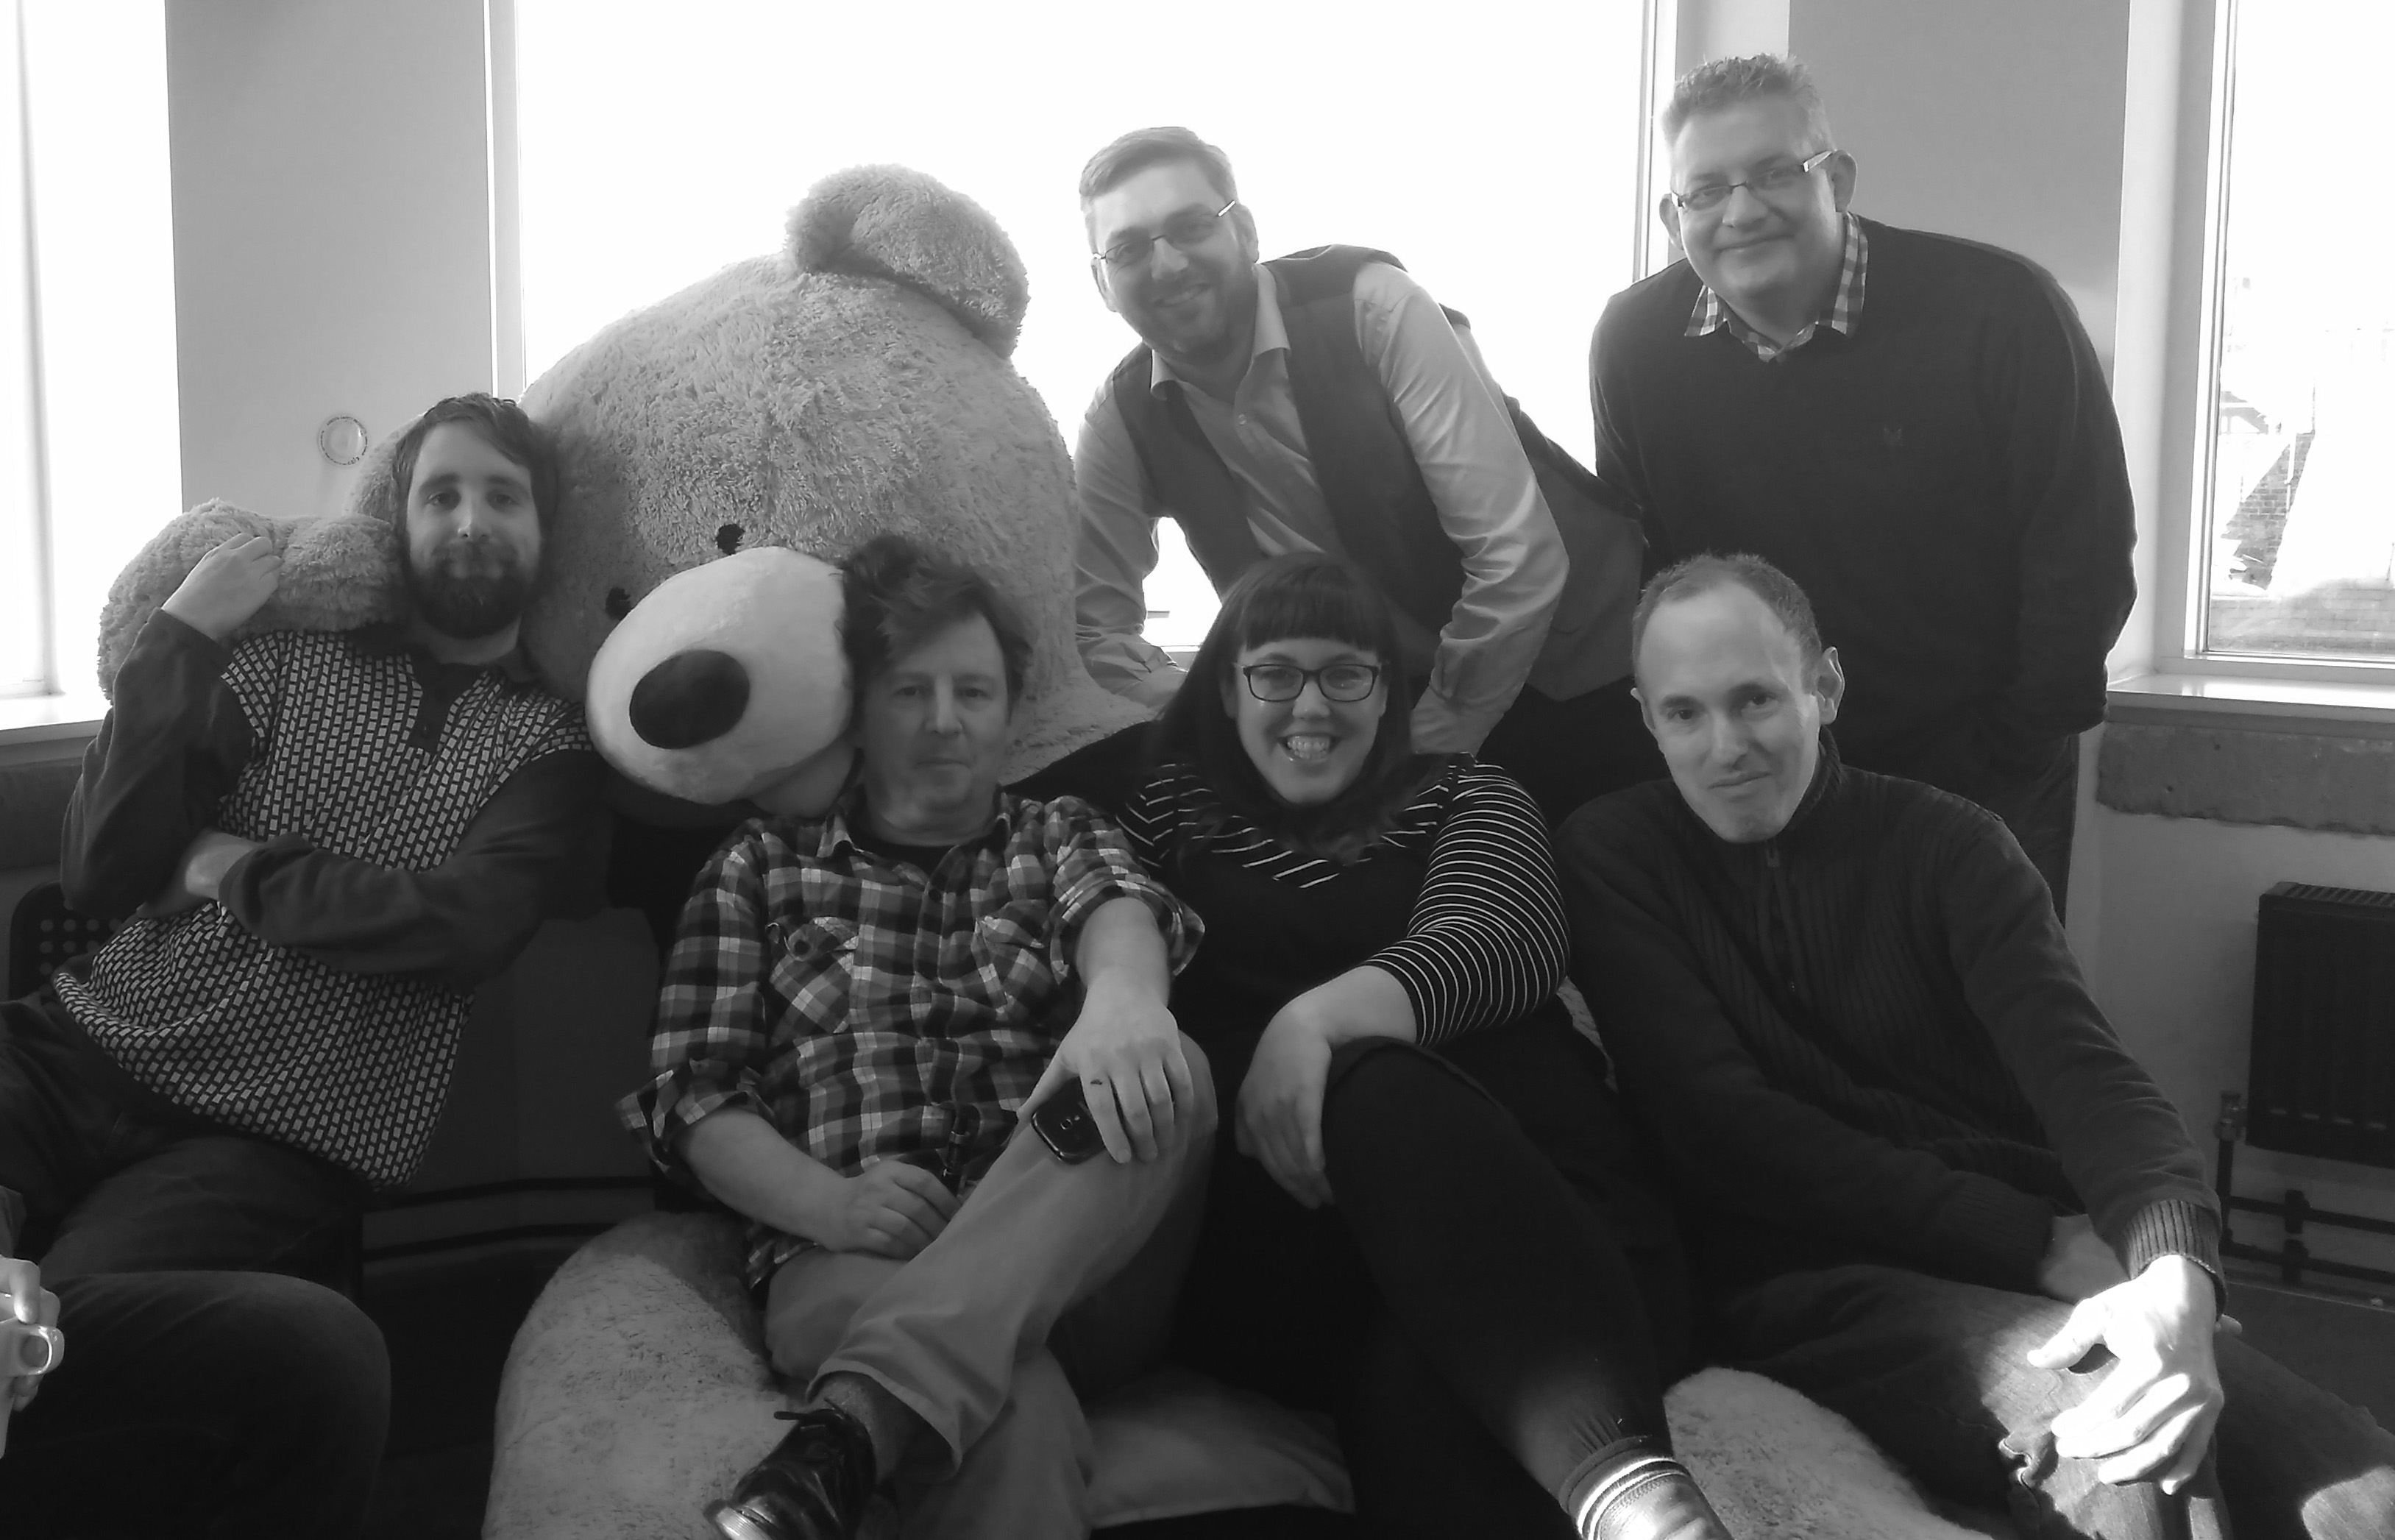 Jelly Liverpool attendees in front of giant bear. 